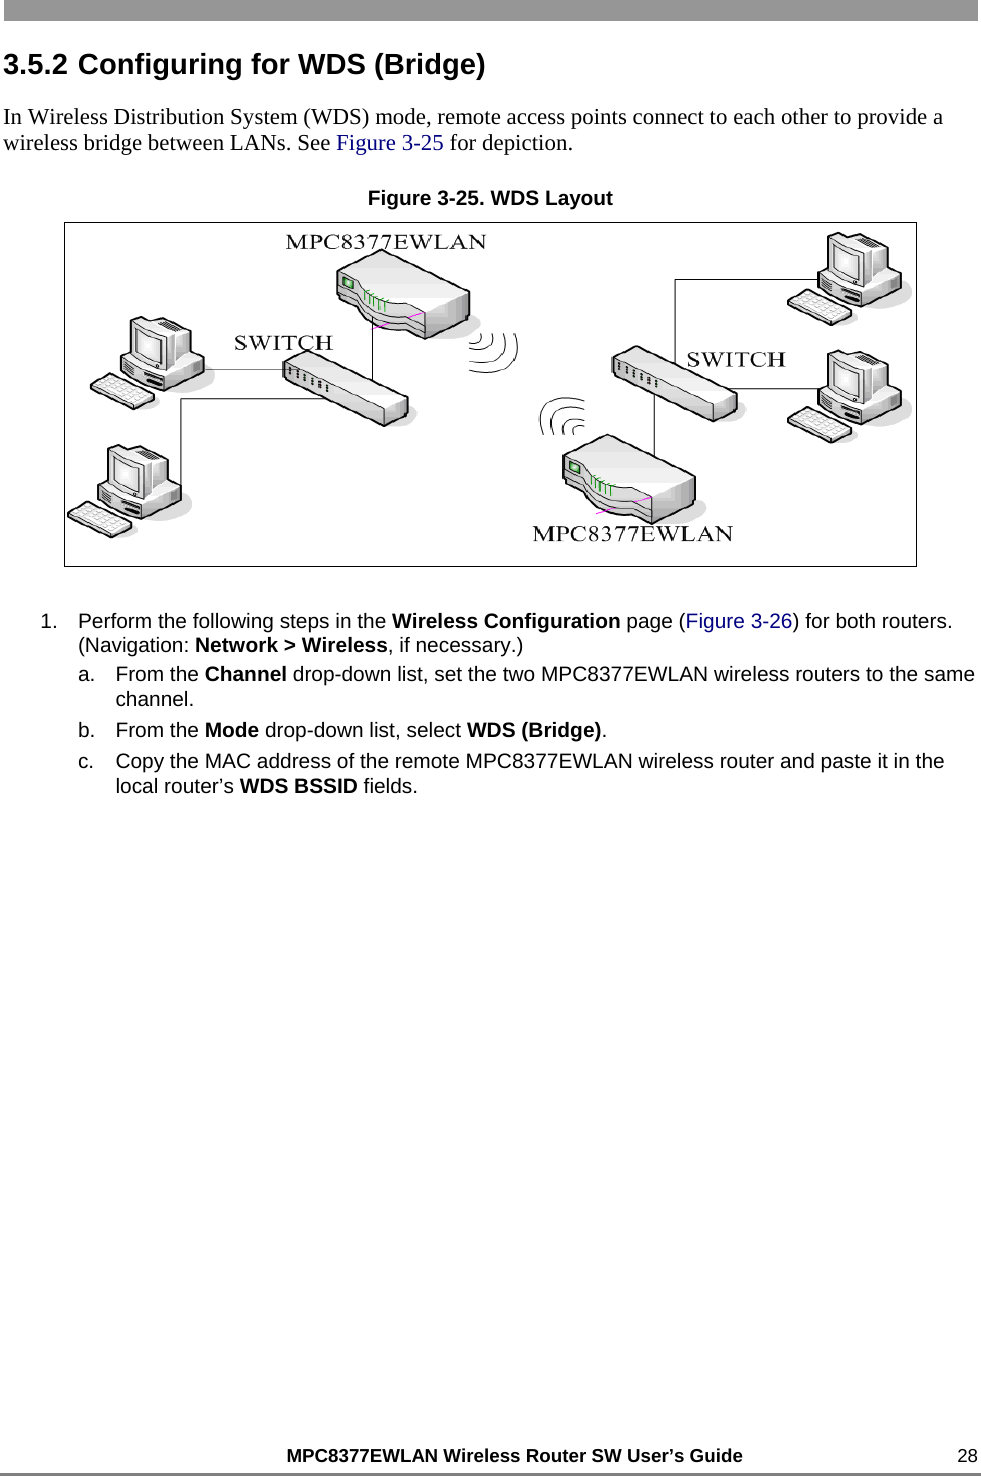                                                          MPC8377EWLAN Wireless Router SW User’s Guide    28 3.5.2 Configuring for WDS (Bridge) In Wireless Distribution System (WDS) mode, remote access points connect to each other to provide a wireless bridge between LANs. See Figure 3-25 for depiction. Figure 3-25. WDS Layout  1.  Perform the following steps in the Wireless Configuration page (Figure 3-26) for both routers. (Navigation: Network &gt; Wireless, if necessary.) a. From the Channel drop-down list, set the two MPC8377EWLAN wireless routers to the same channel. b. From the Mode drop-down list, select WDS (Bridge). c.  Copy the MAC address of the remote MPC8377EWLAN wireless router and paste it in the local router’s WDS BSSID fields. 